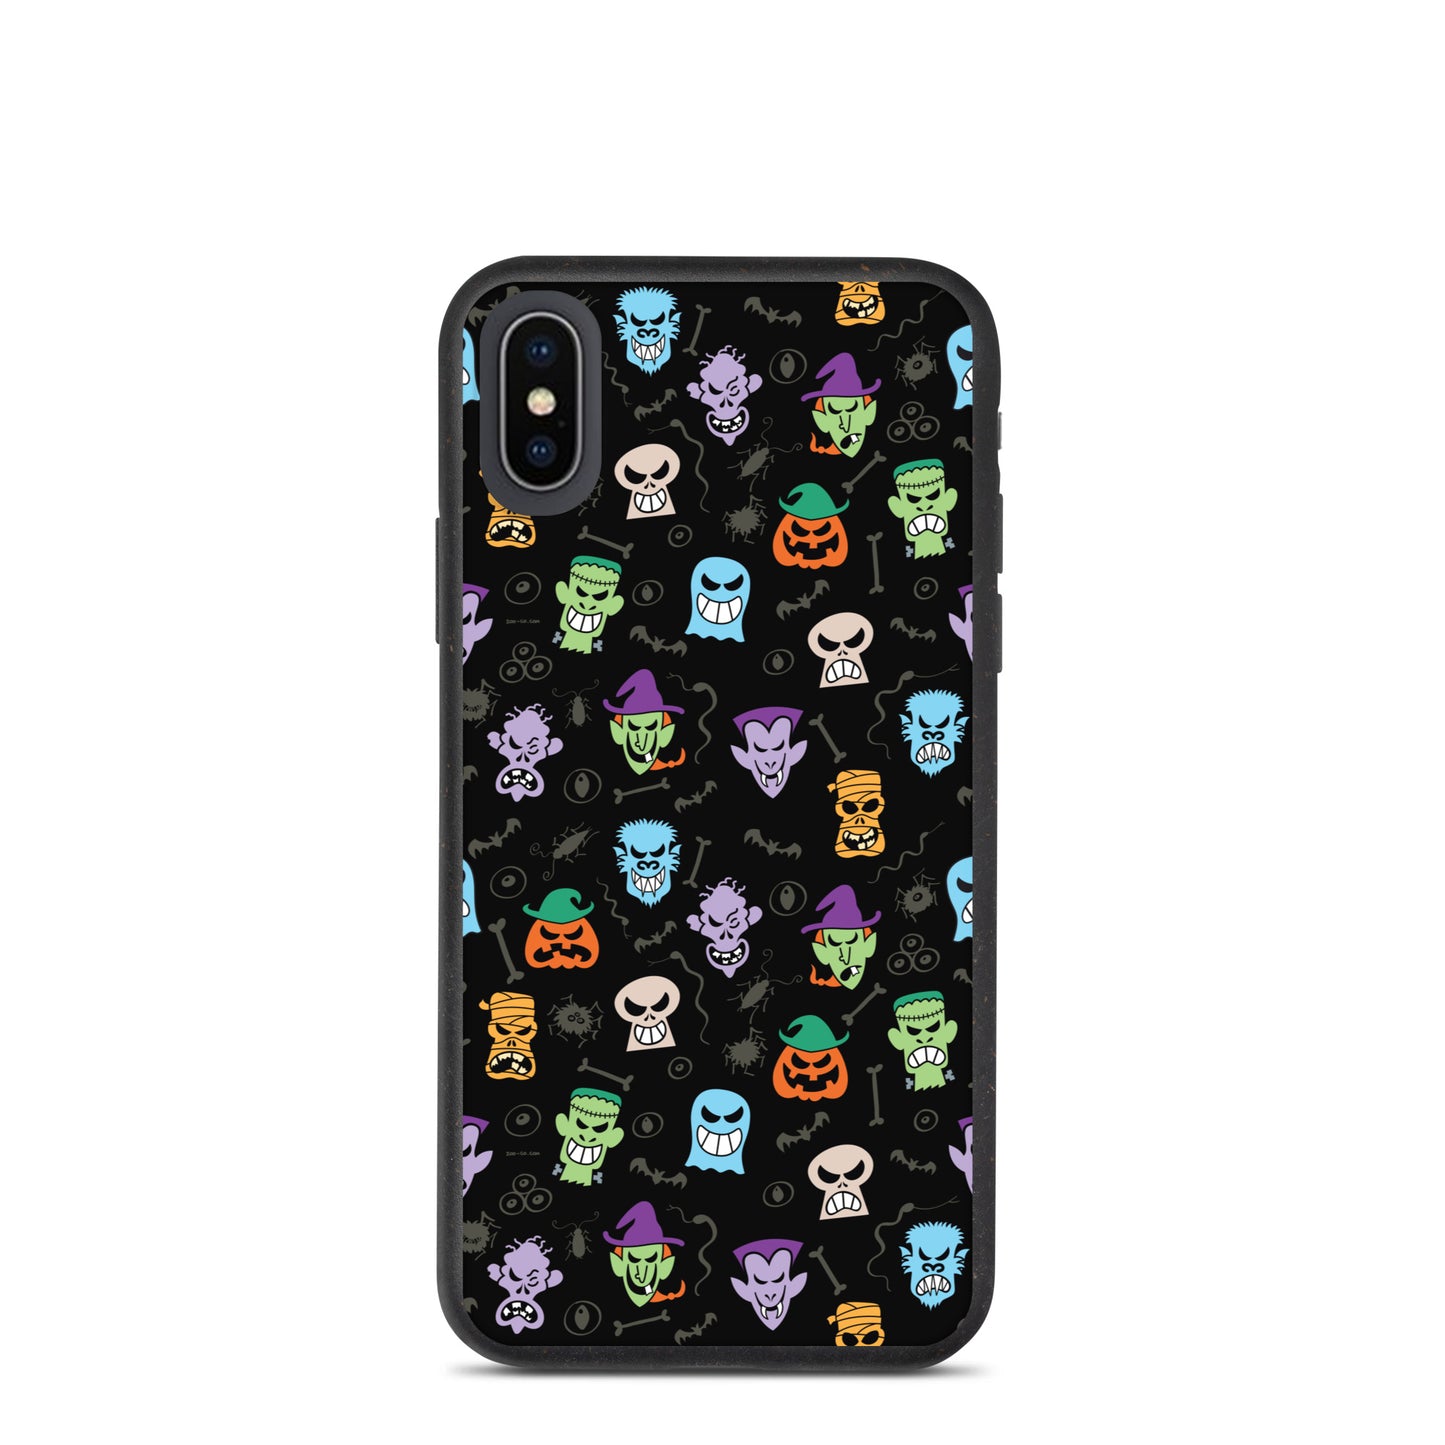 Scary Halloween faces Speckled iPhone case. iPhone x, xs